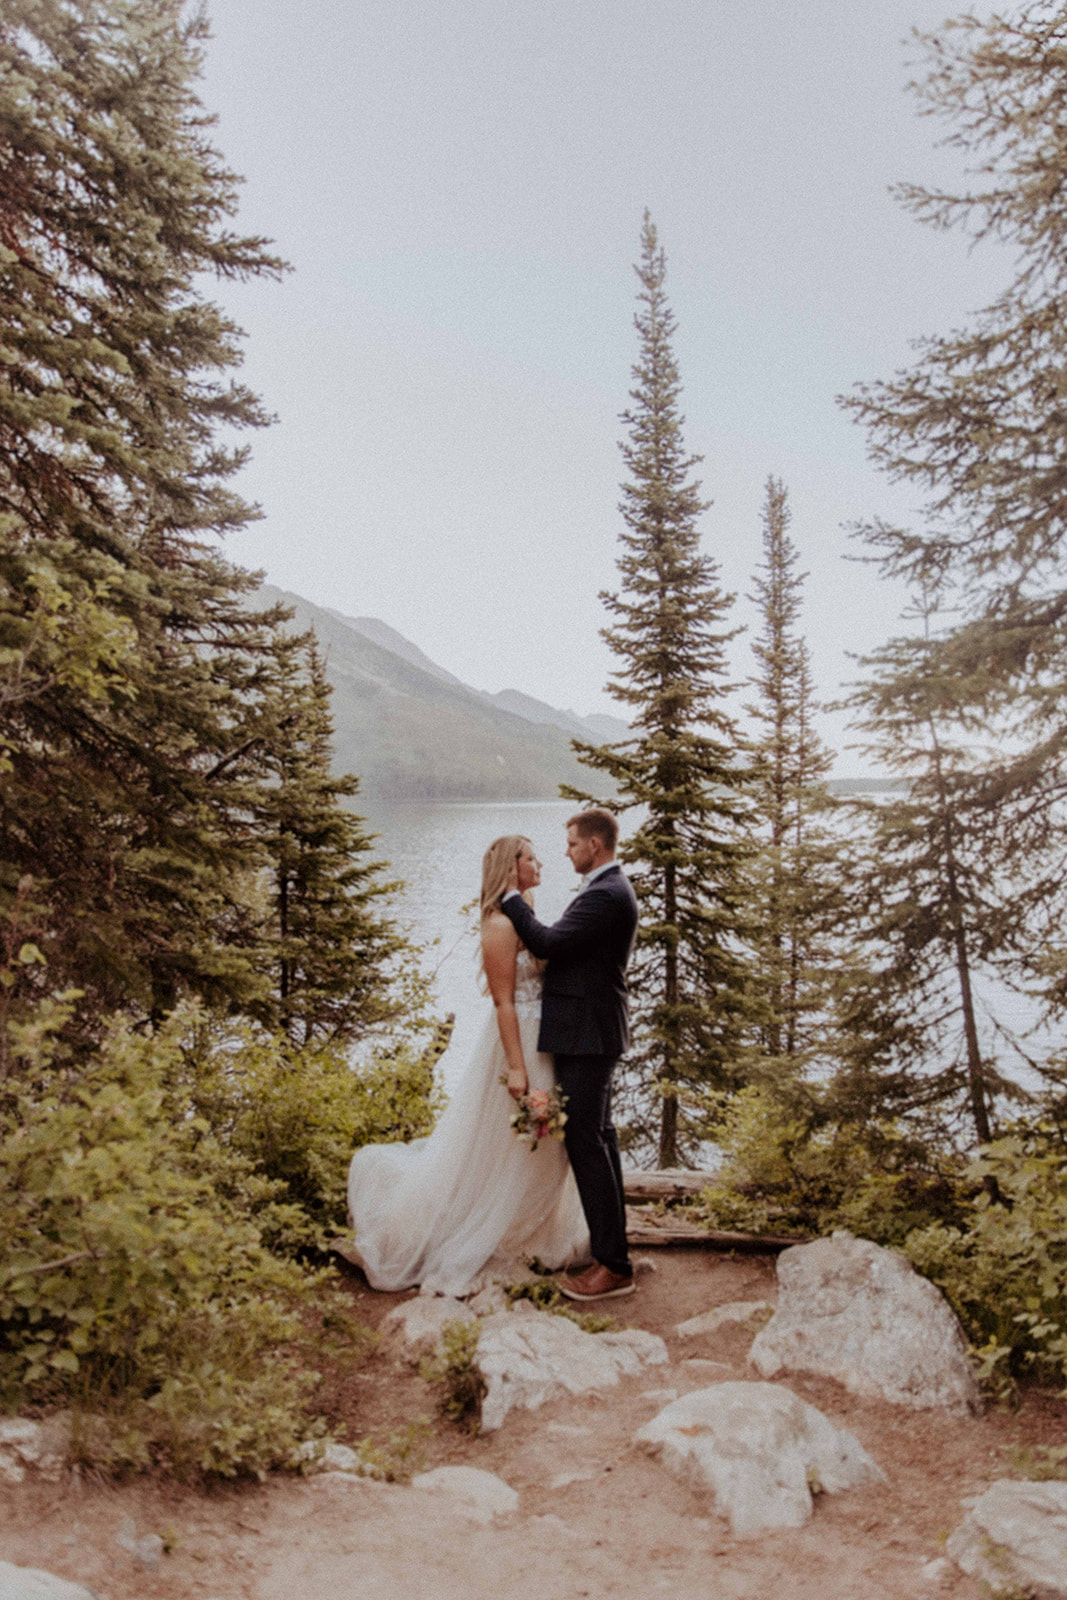 Couple hiking for wedding day photos